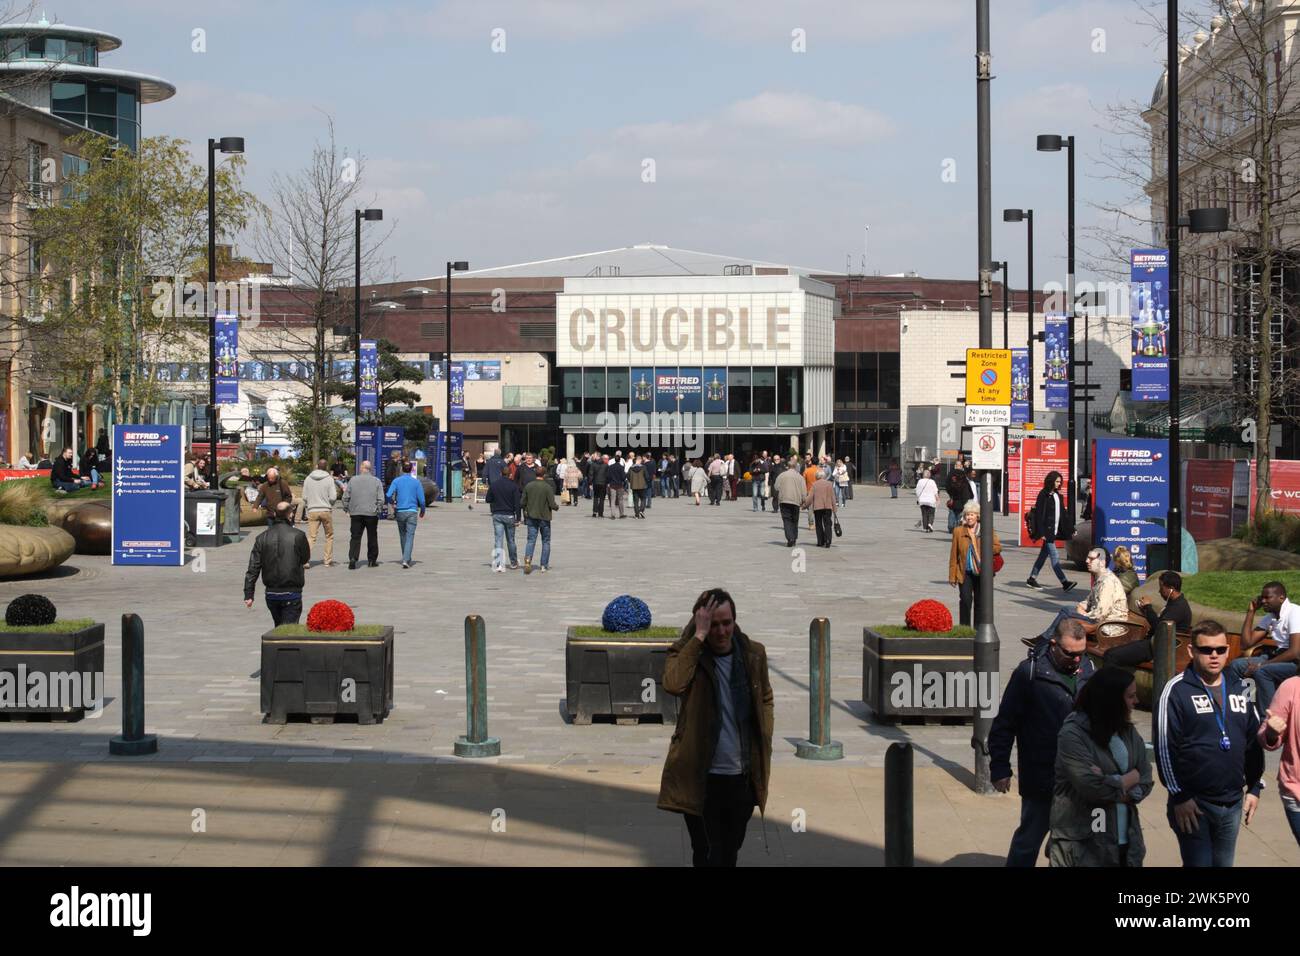 Crucible Theatre and Tudor square in Sheffield city centre England UK, crowds for the World snooker Championship 2015 public space streetscene Stock Photo